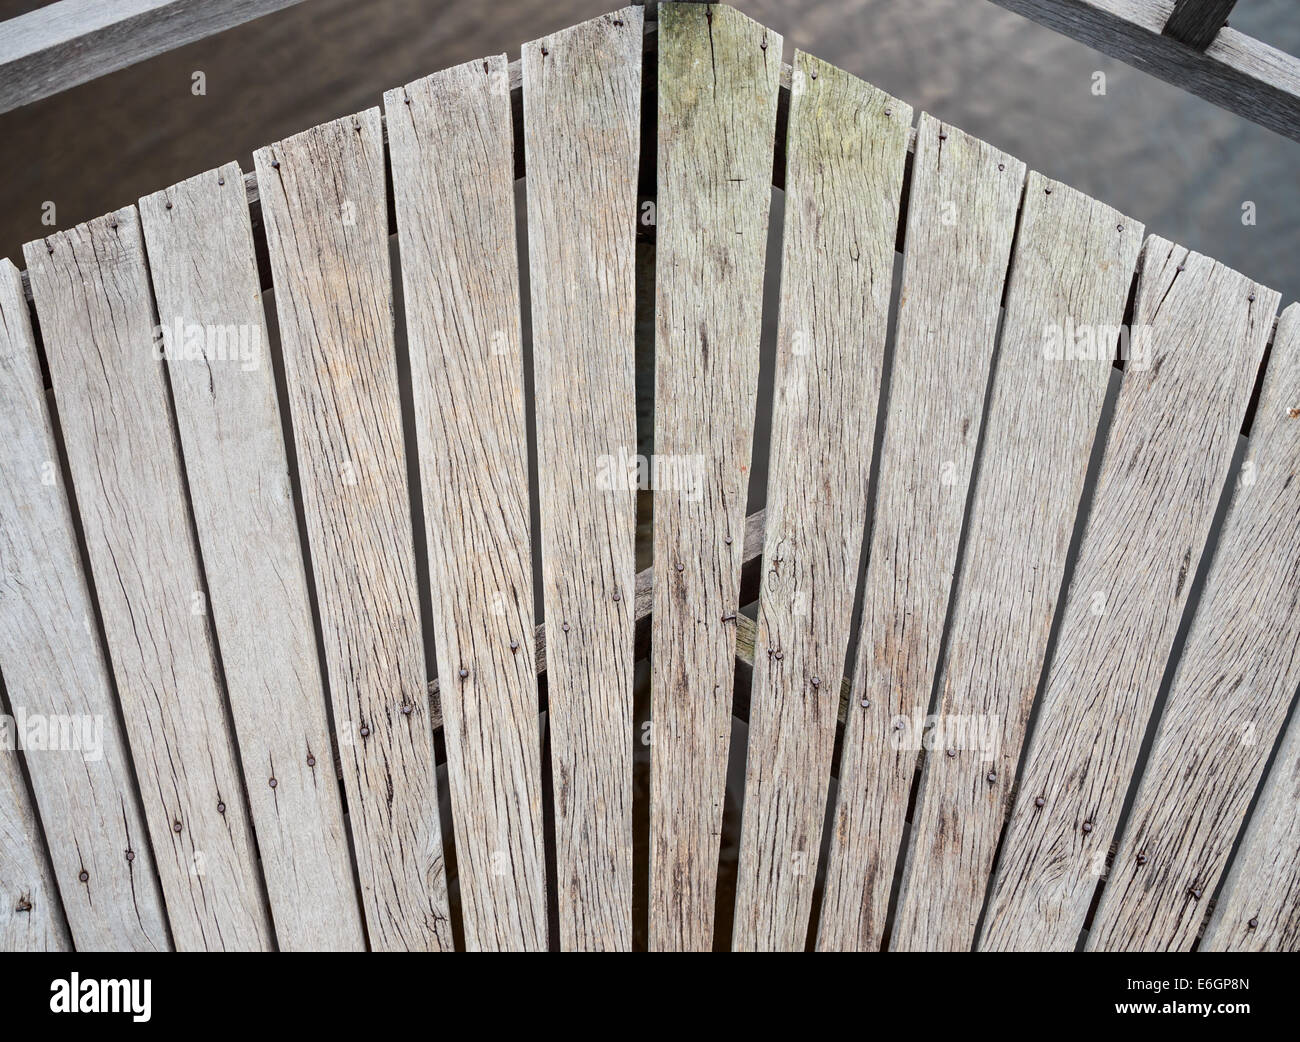 This photo displays the flooring design of a turn on a wooden bridge. Stock Photo